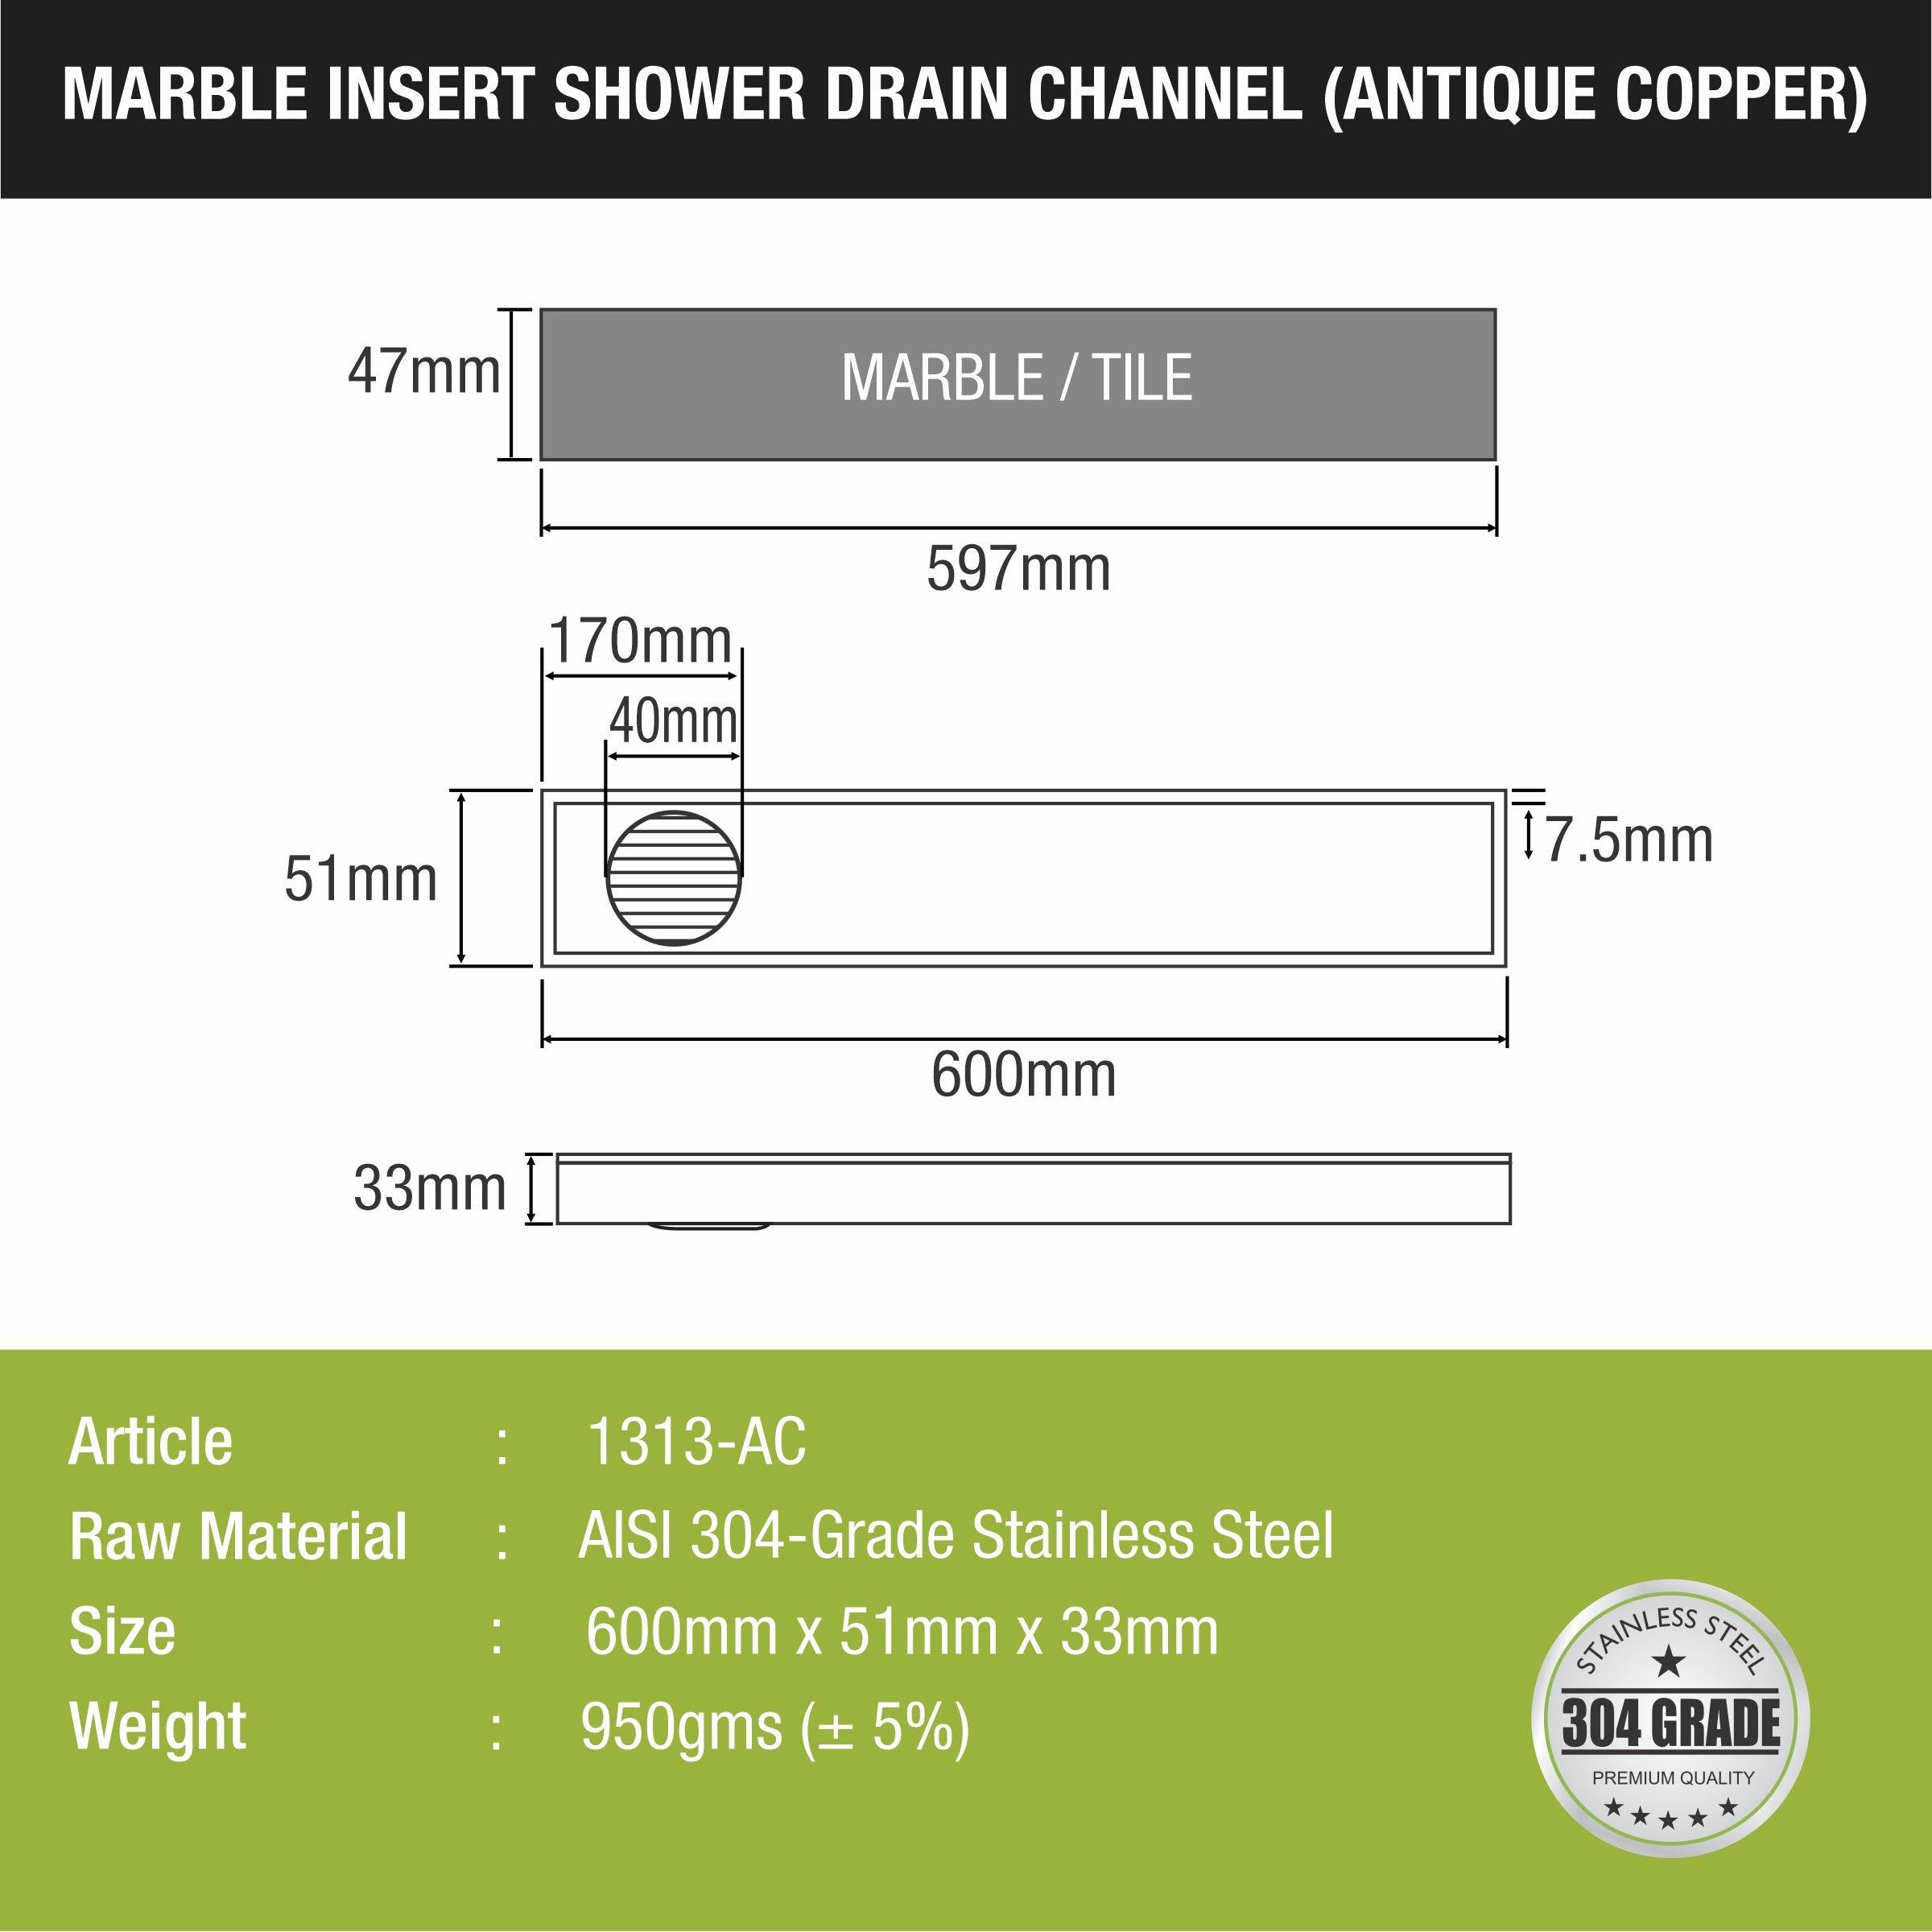 Marble Insert Shower Drain Channel - Antique Copper (24 x 2 Inches) sizes and dimension